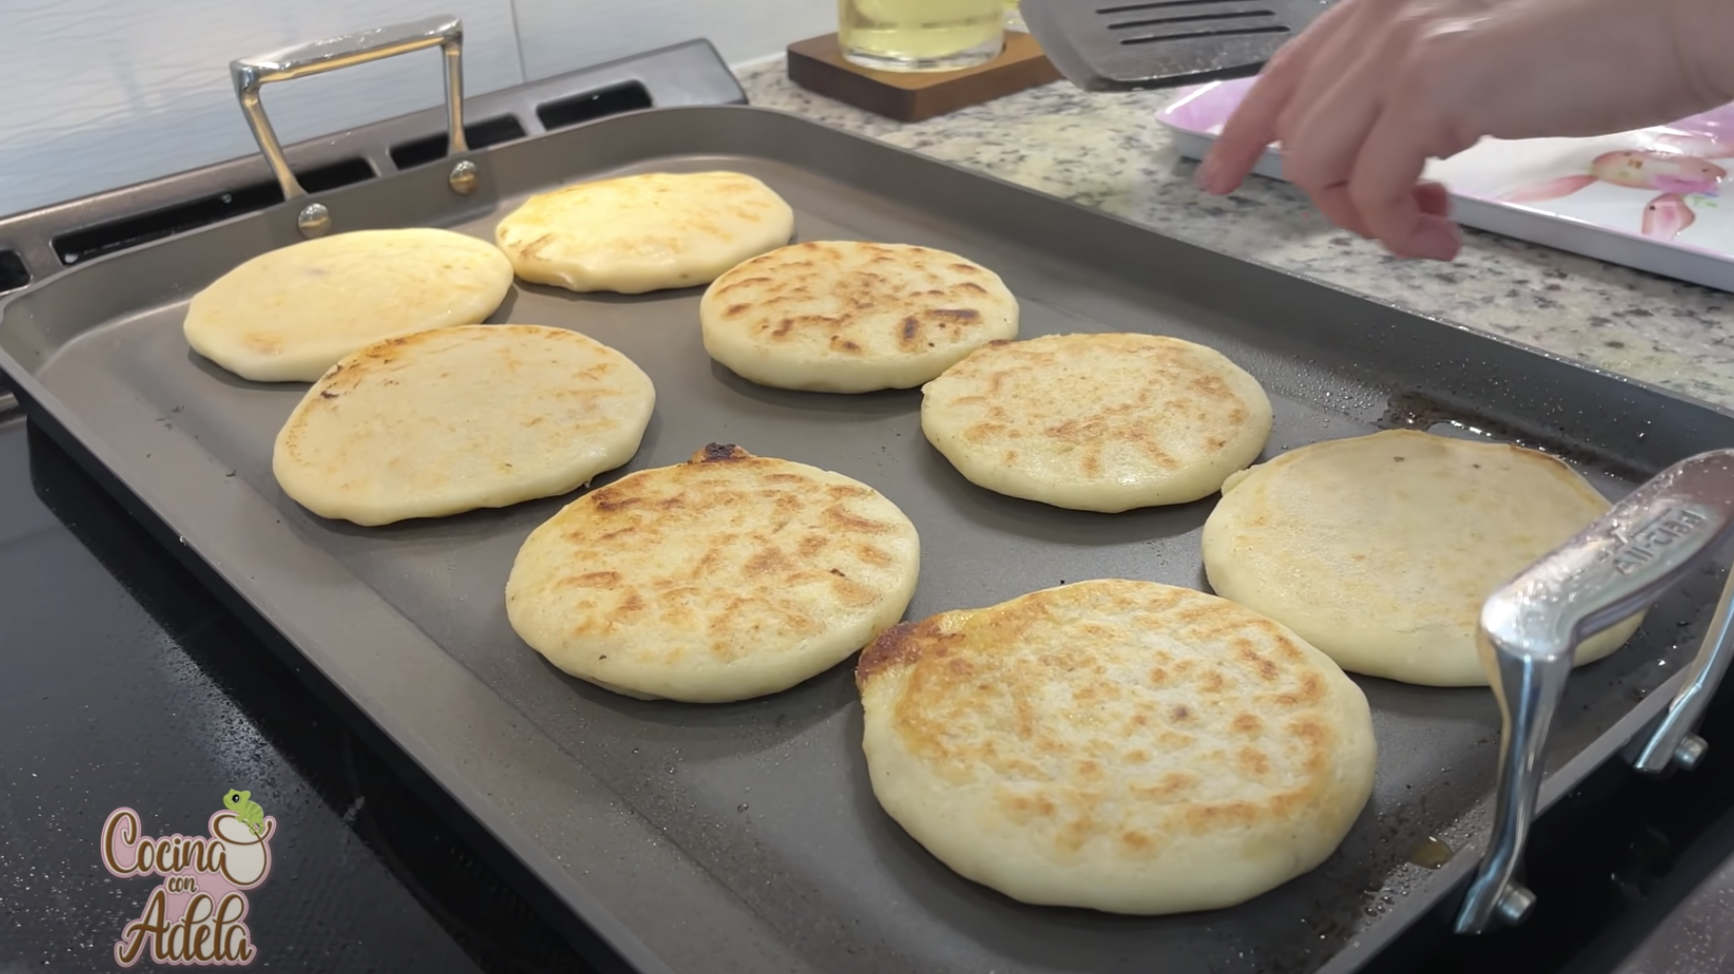 Pupusas cooking on a griddle pan